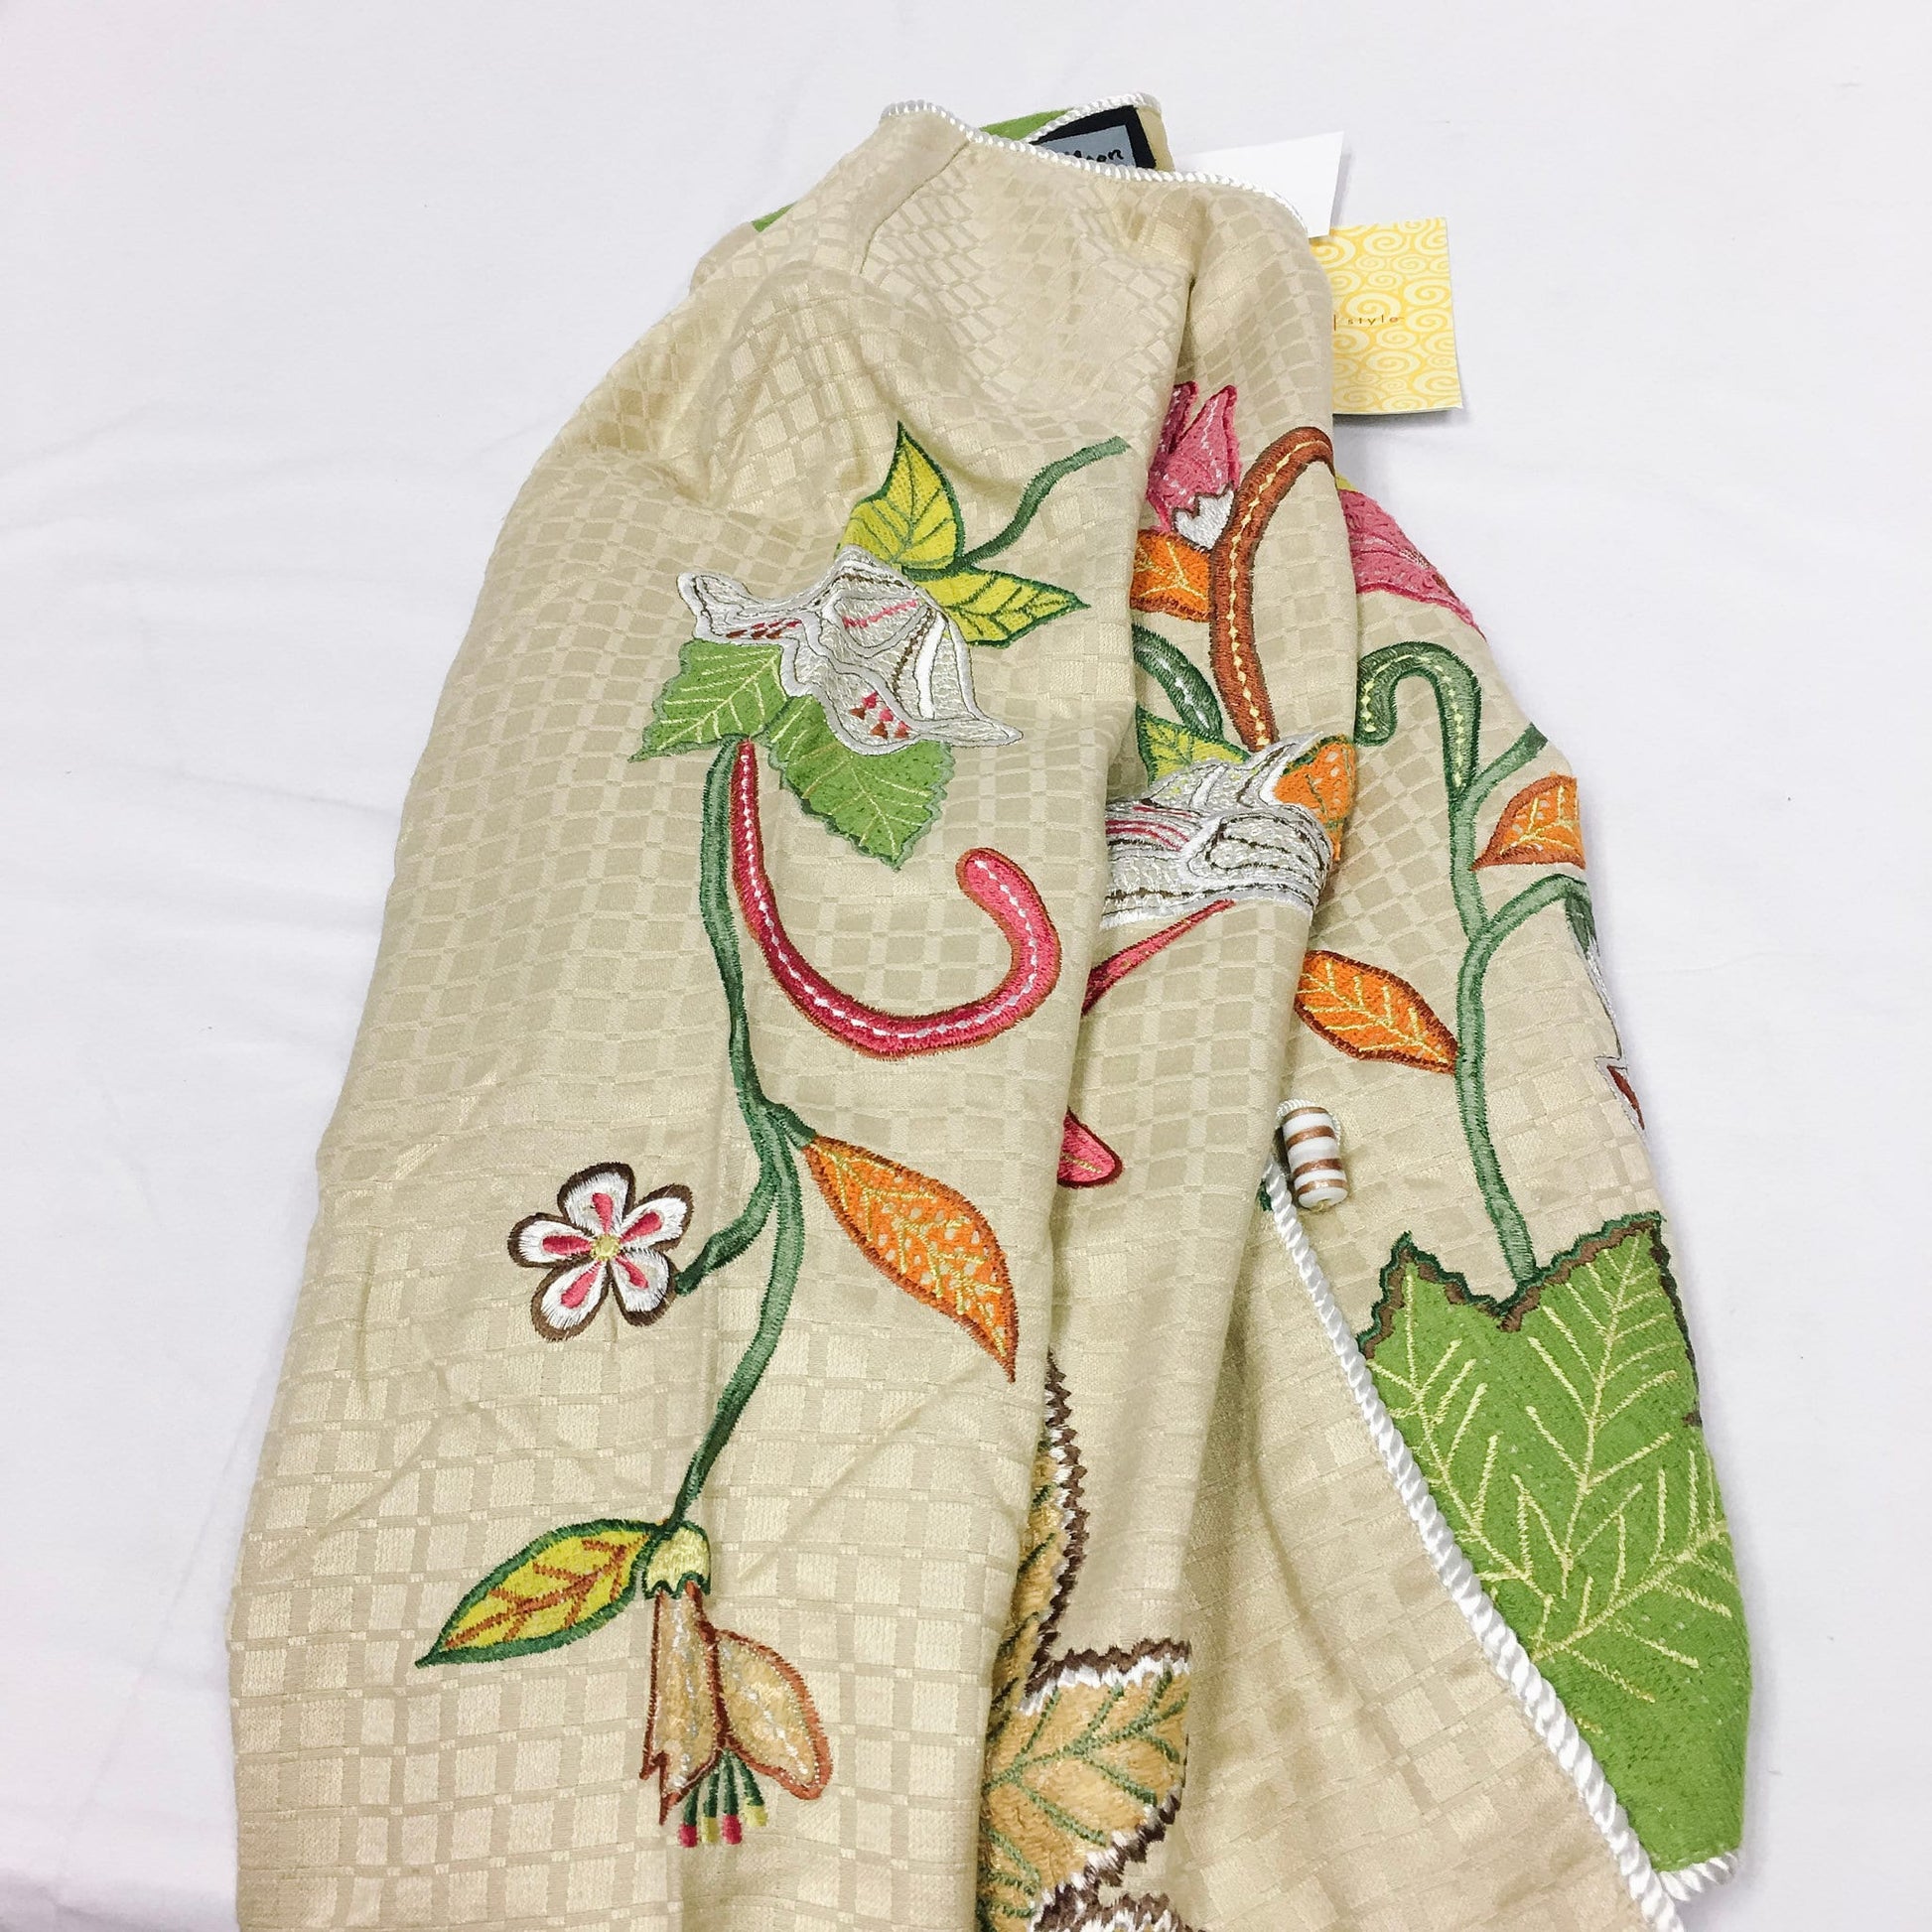 NWT Vintage Indigo Moon Tan Jacket with Colorful Floral Embroidery, sz. L